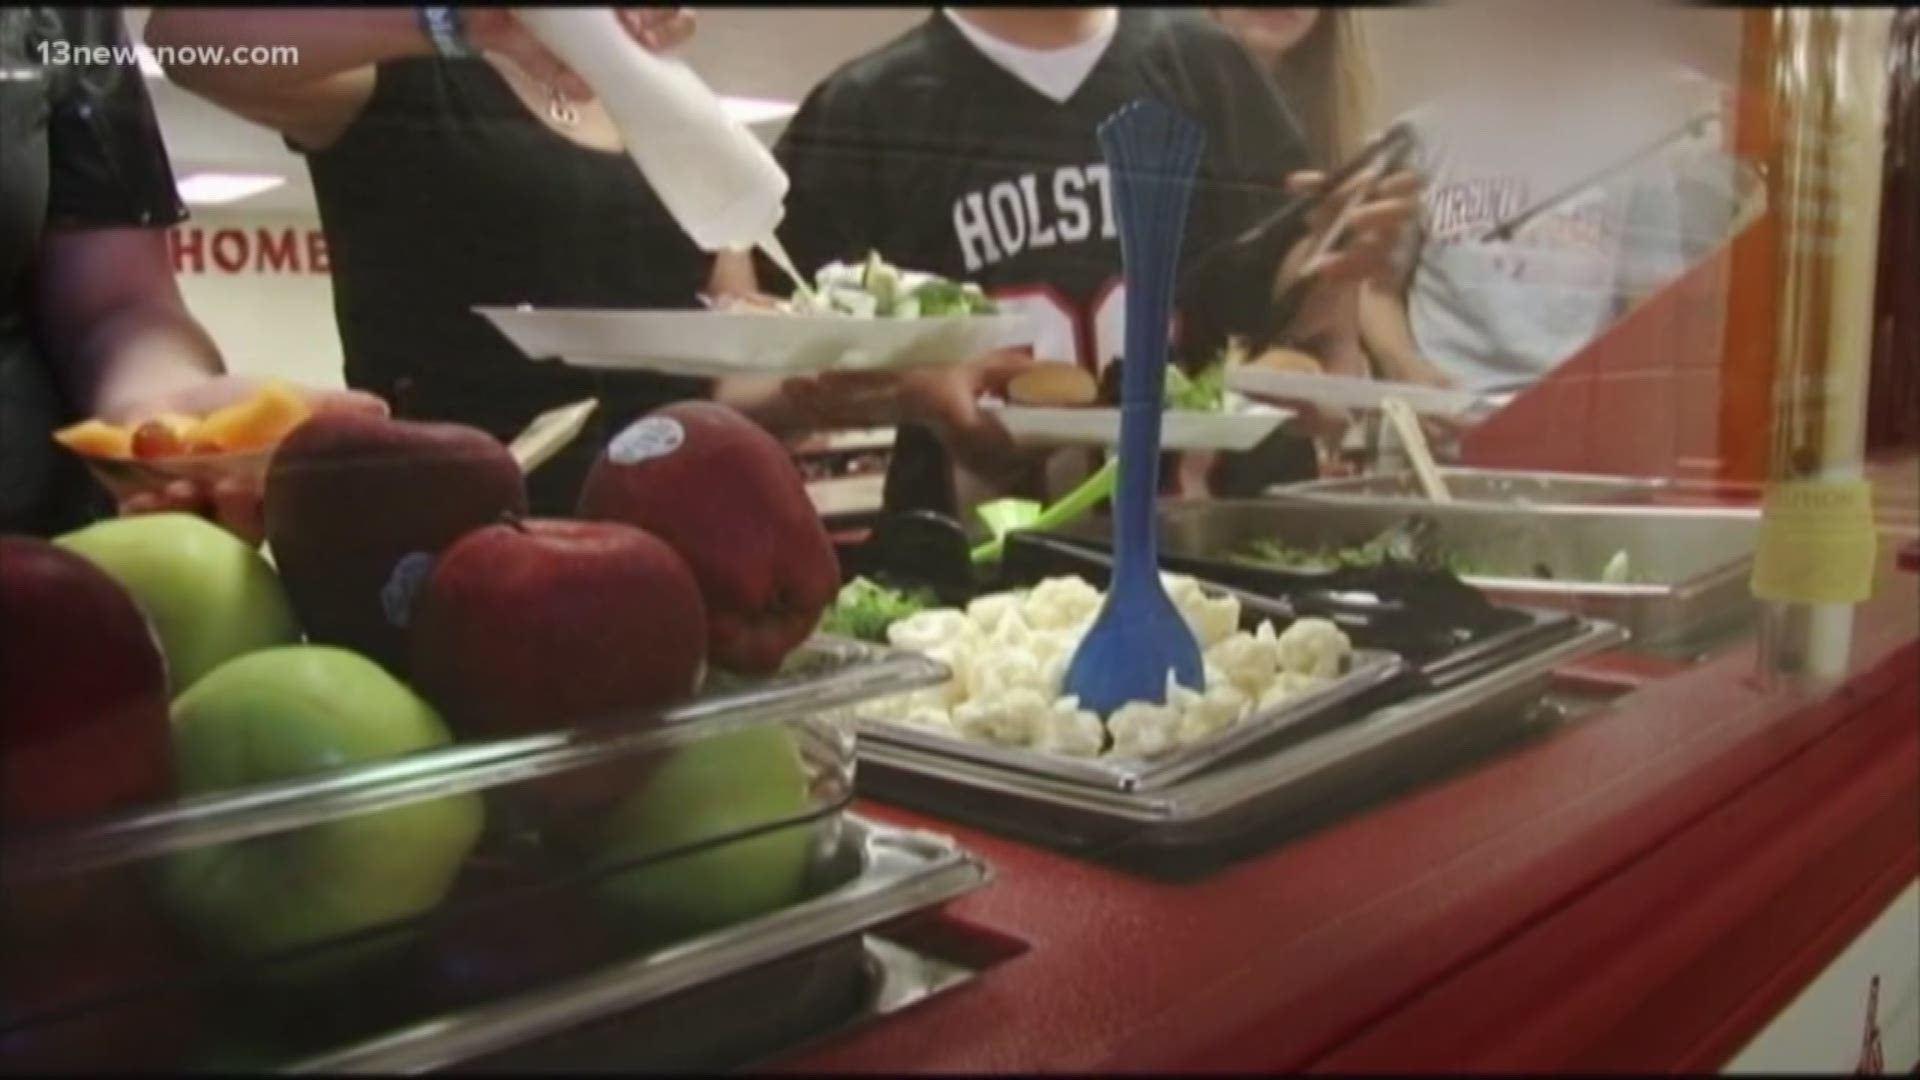 The Boys & Girls Club of the Virginia Peninsula announced an after school meal program. It will be available at no separate charge to all participants at several locations